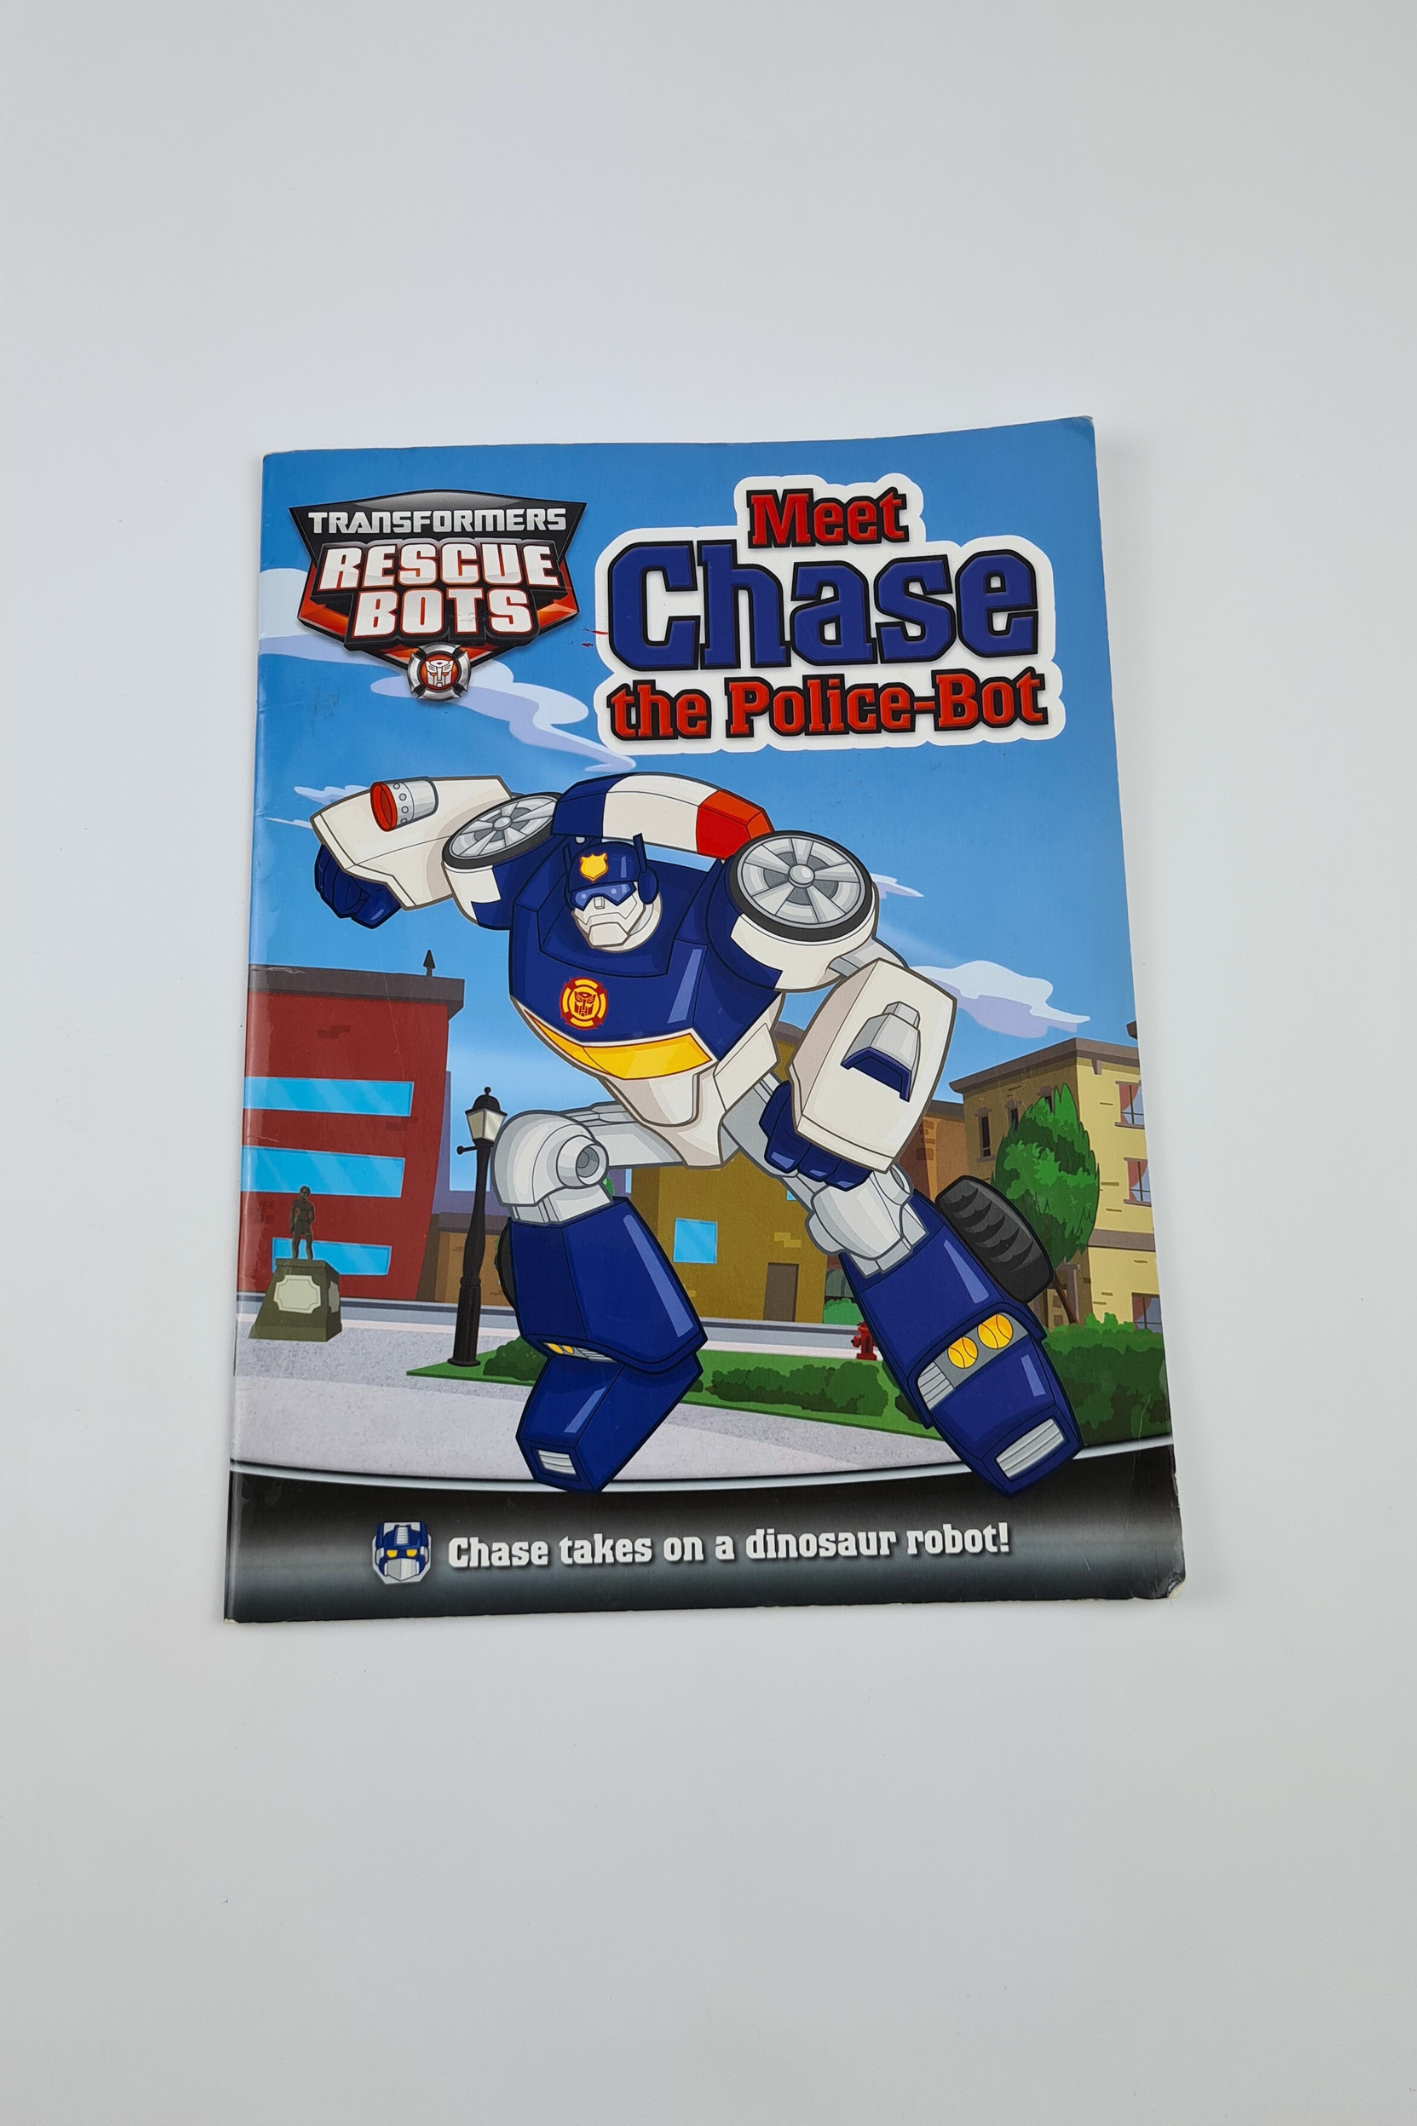 Meet Chase The Police-Bot Story Book